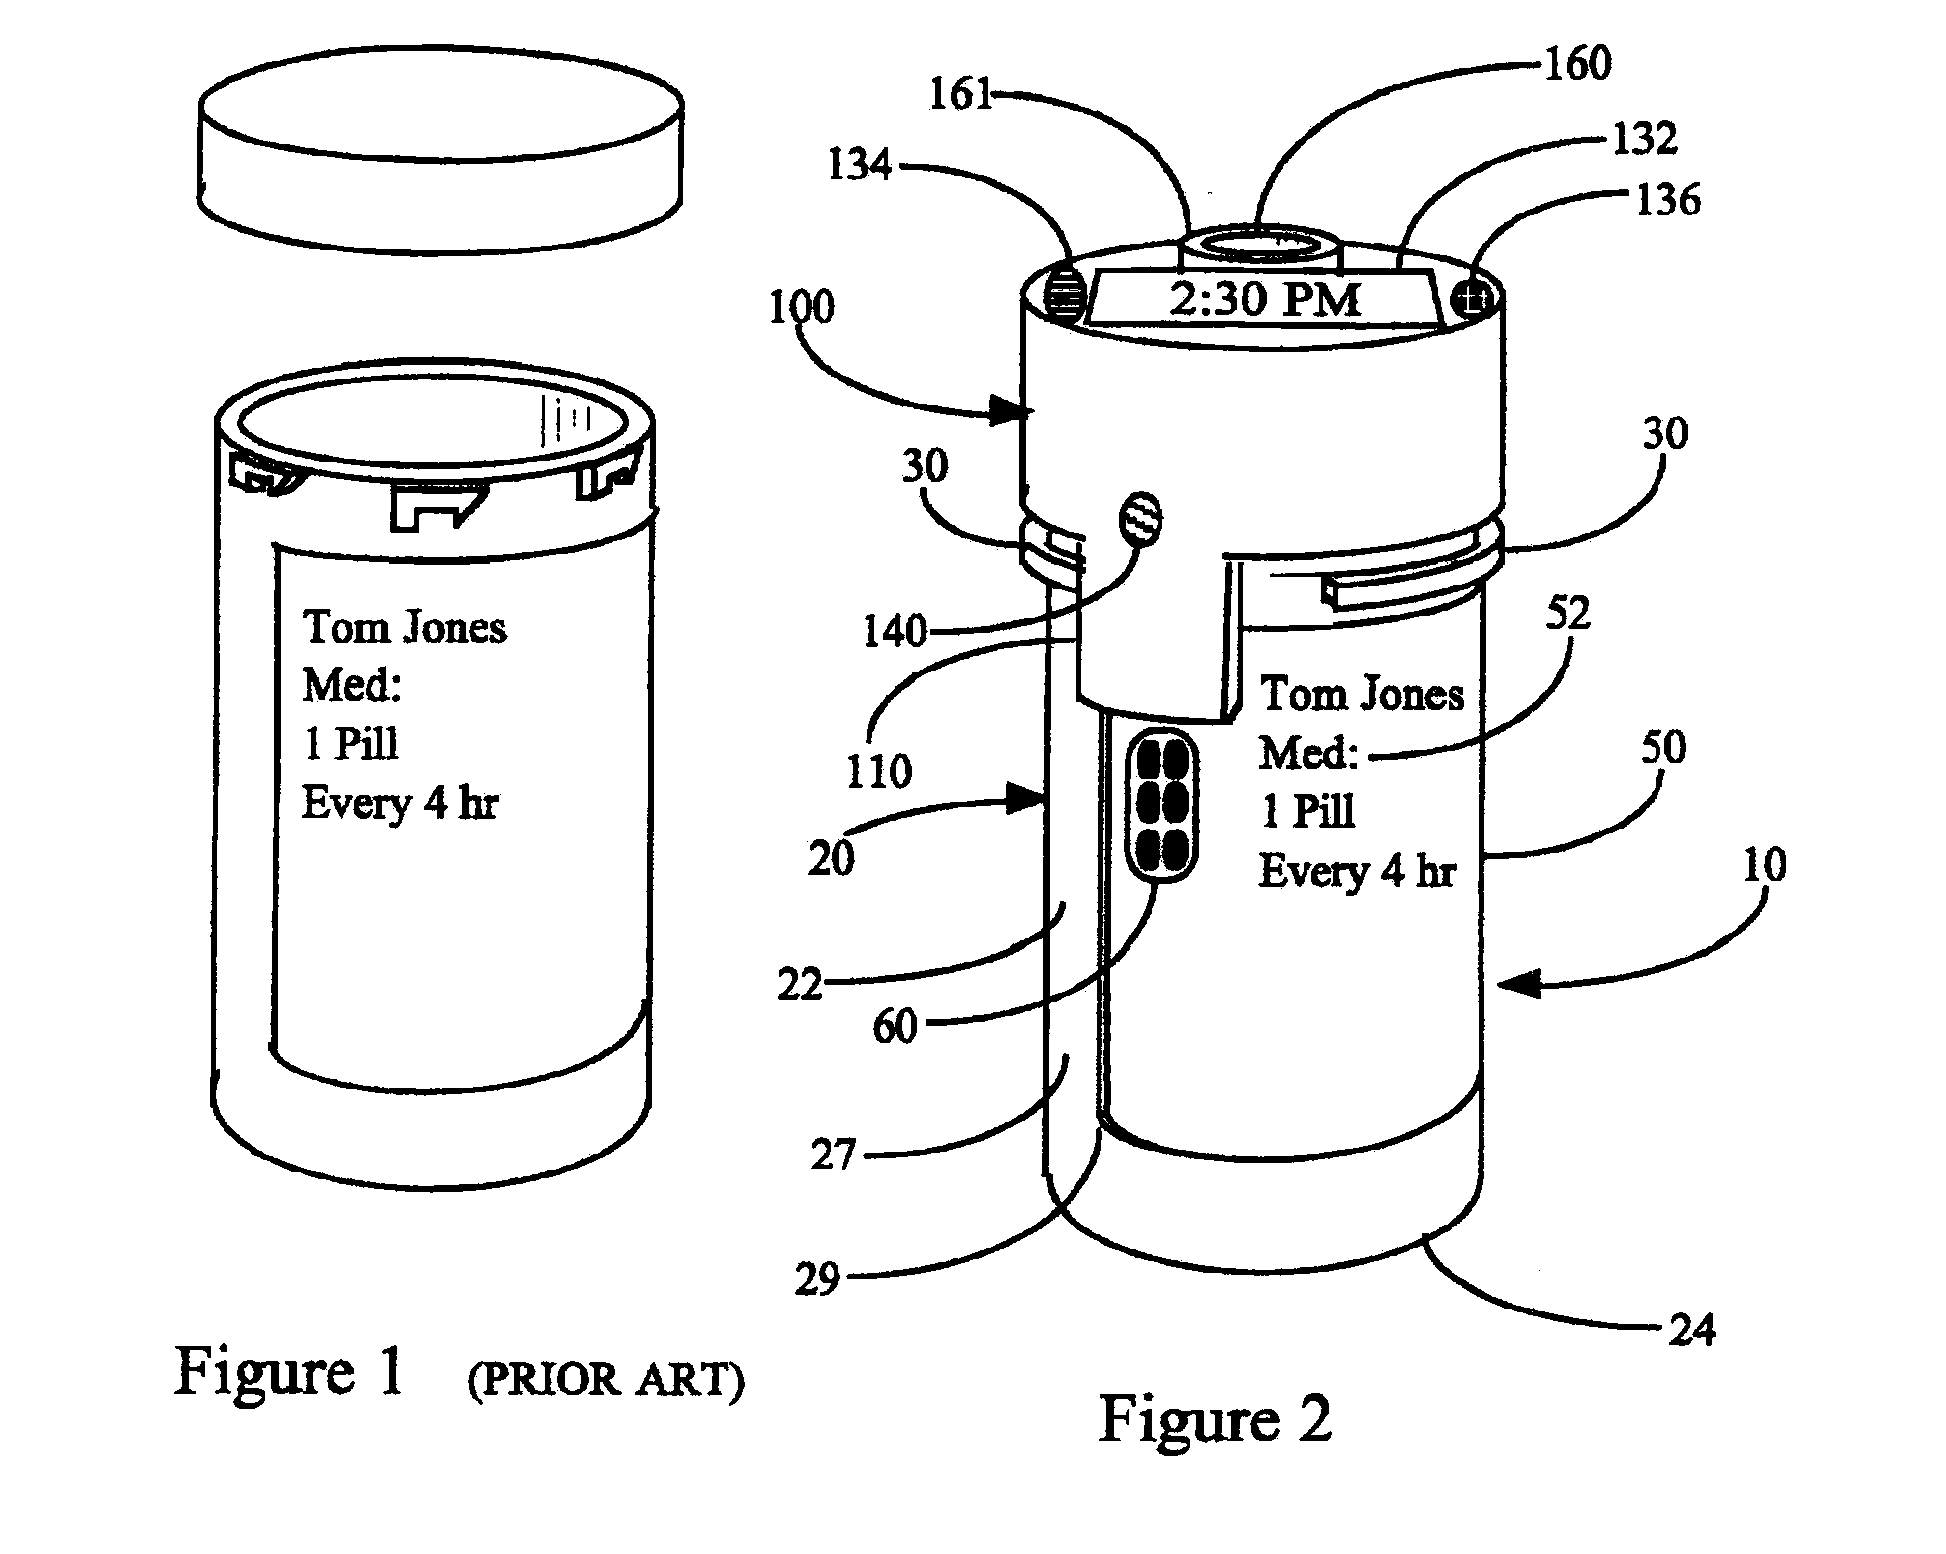 Interactive medication container labeling